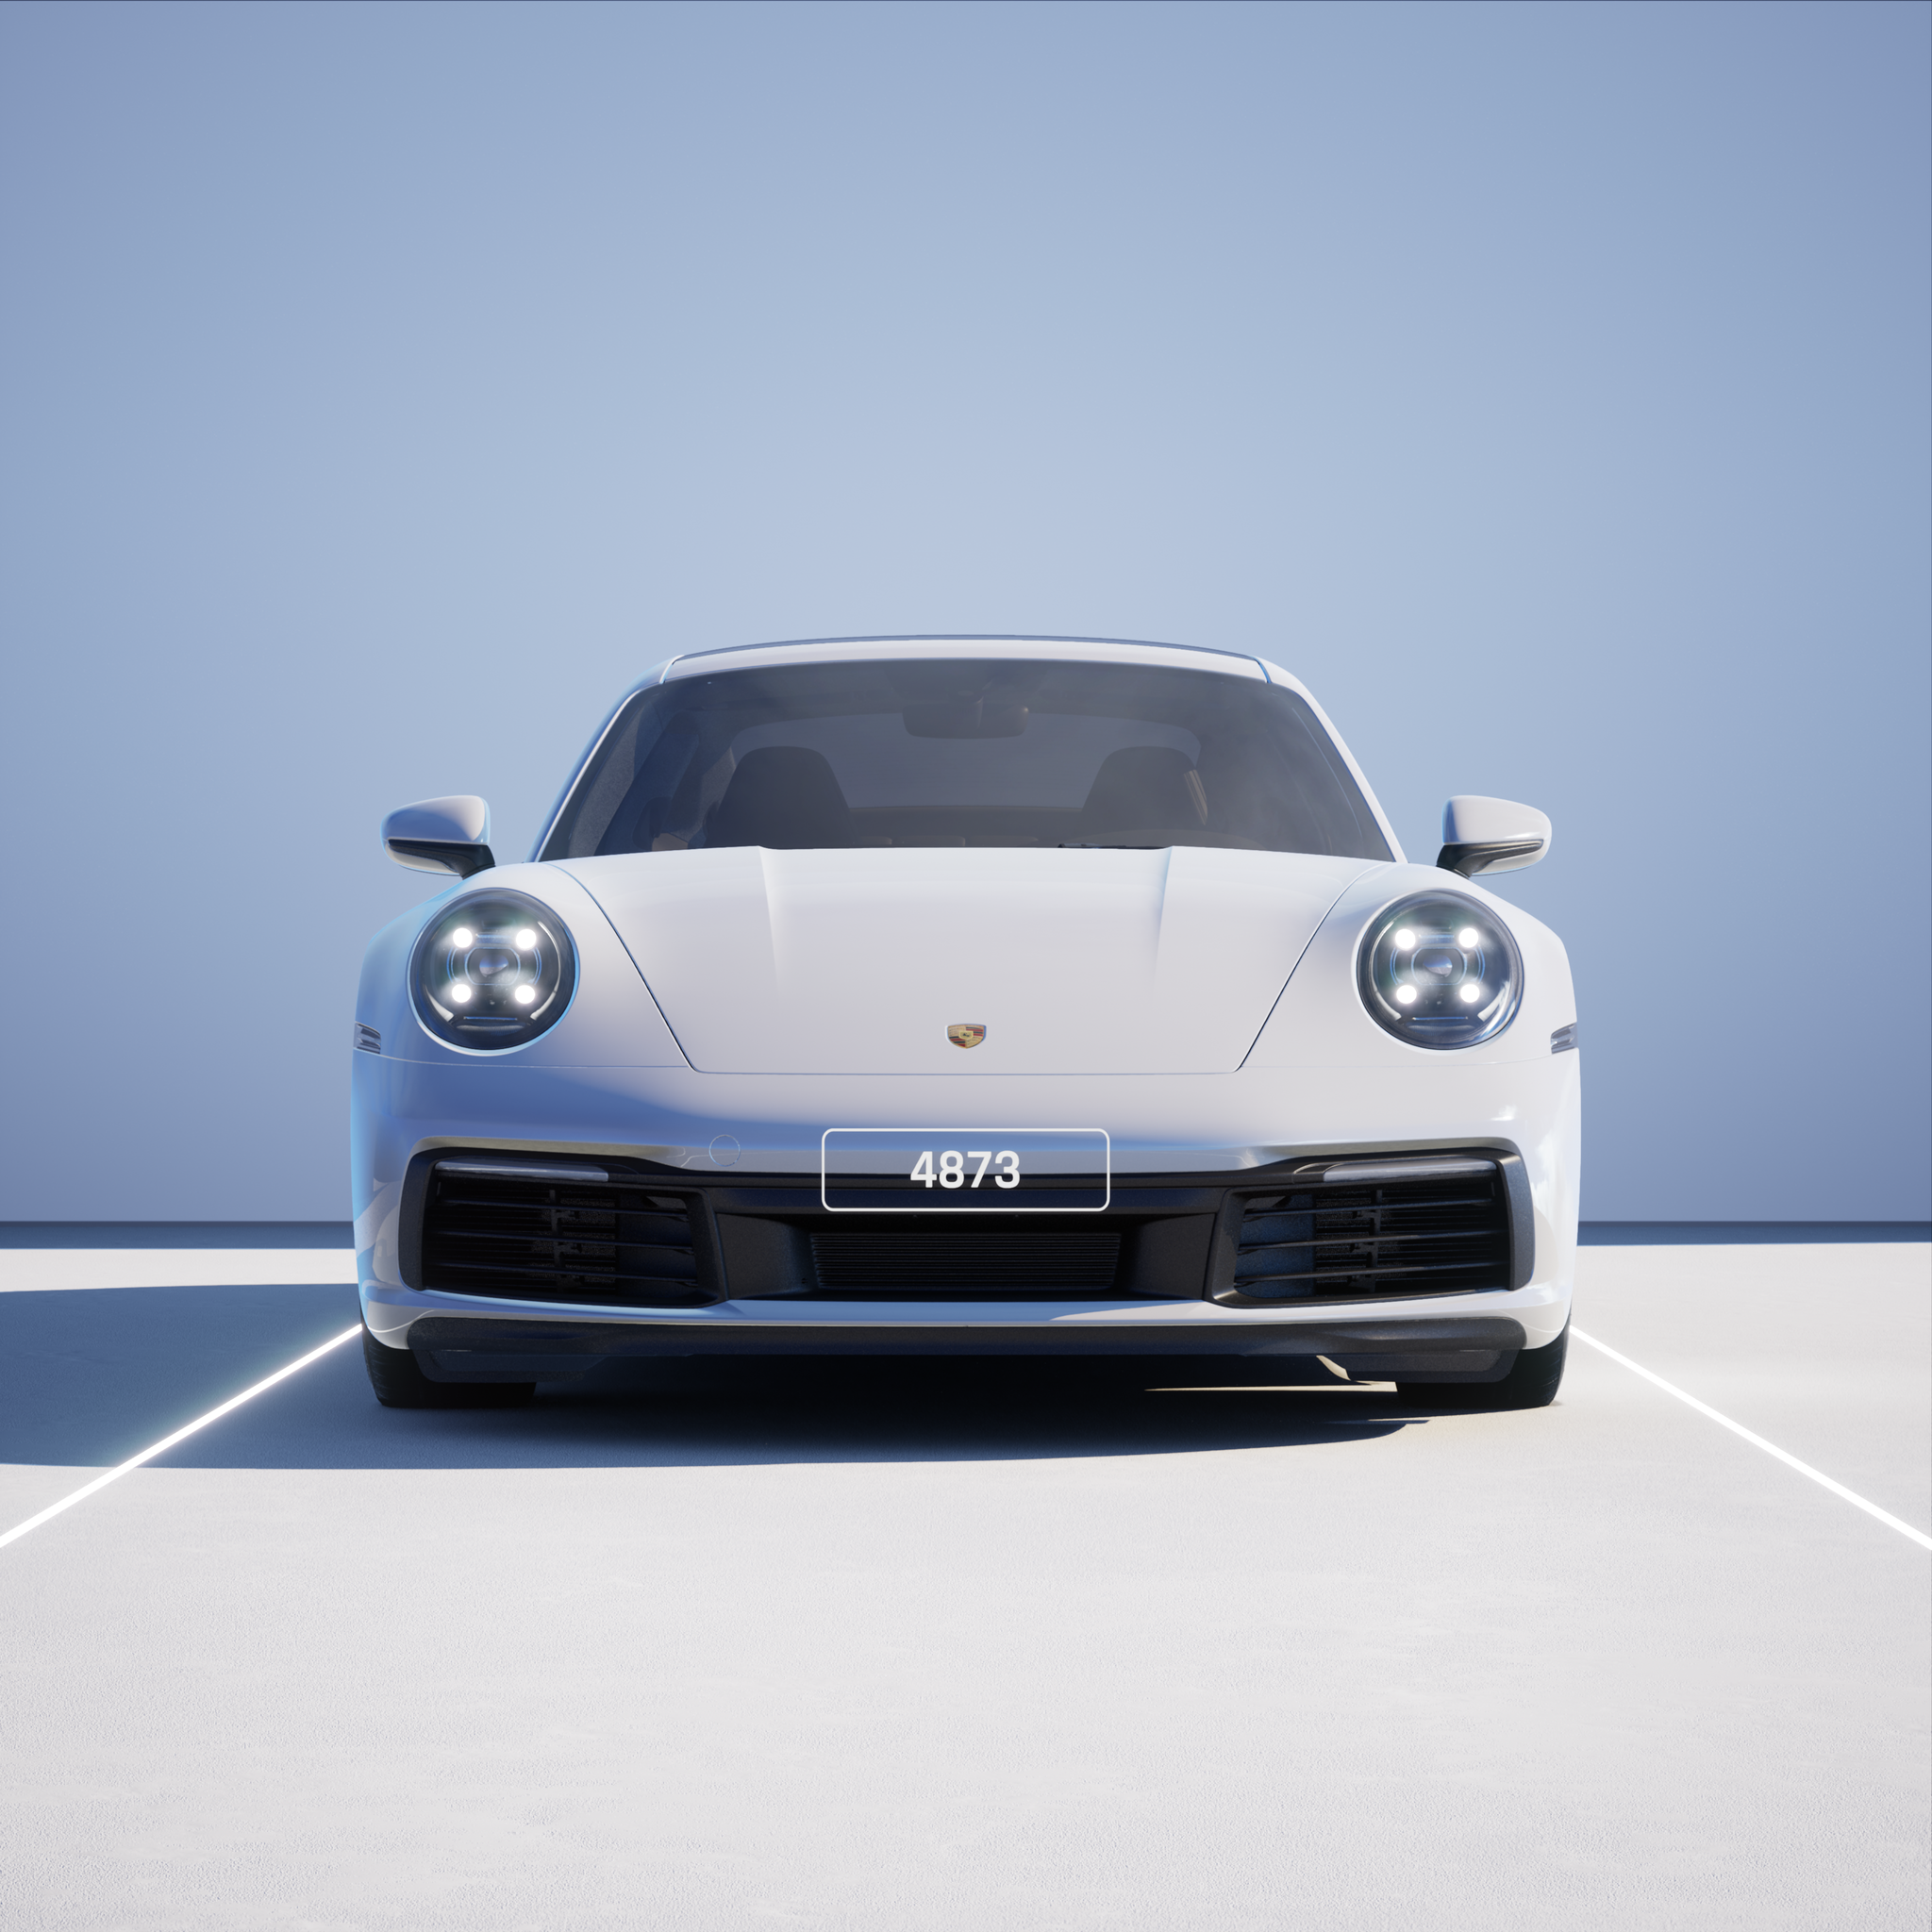 The PORSCHΞ 911 4873 image in phase